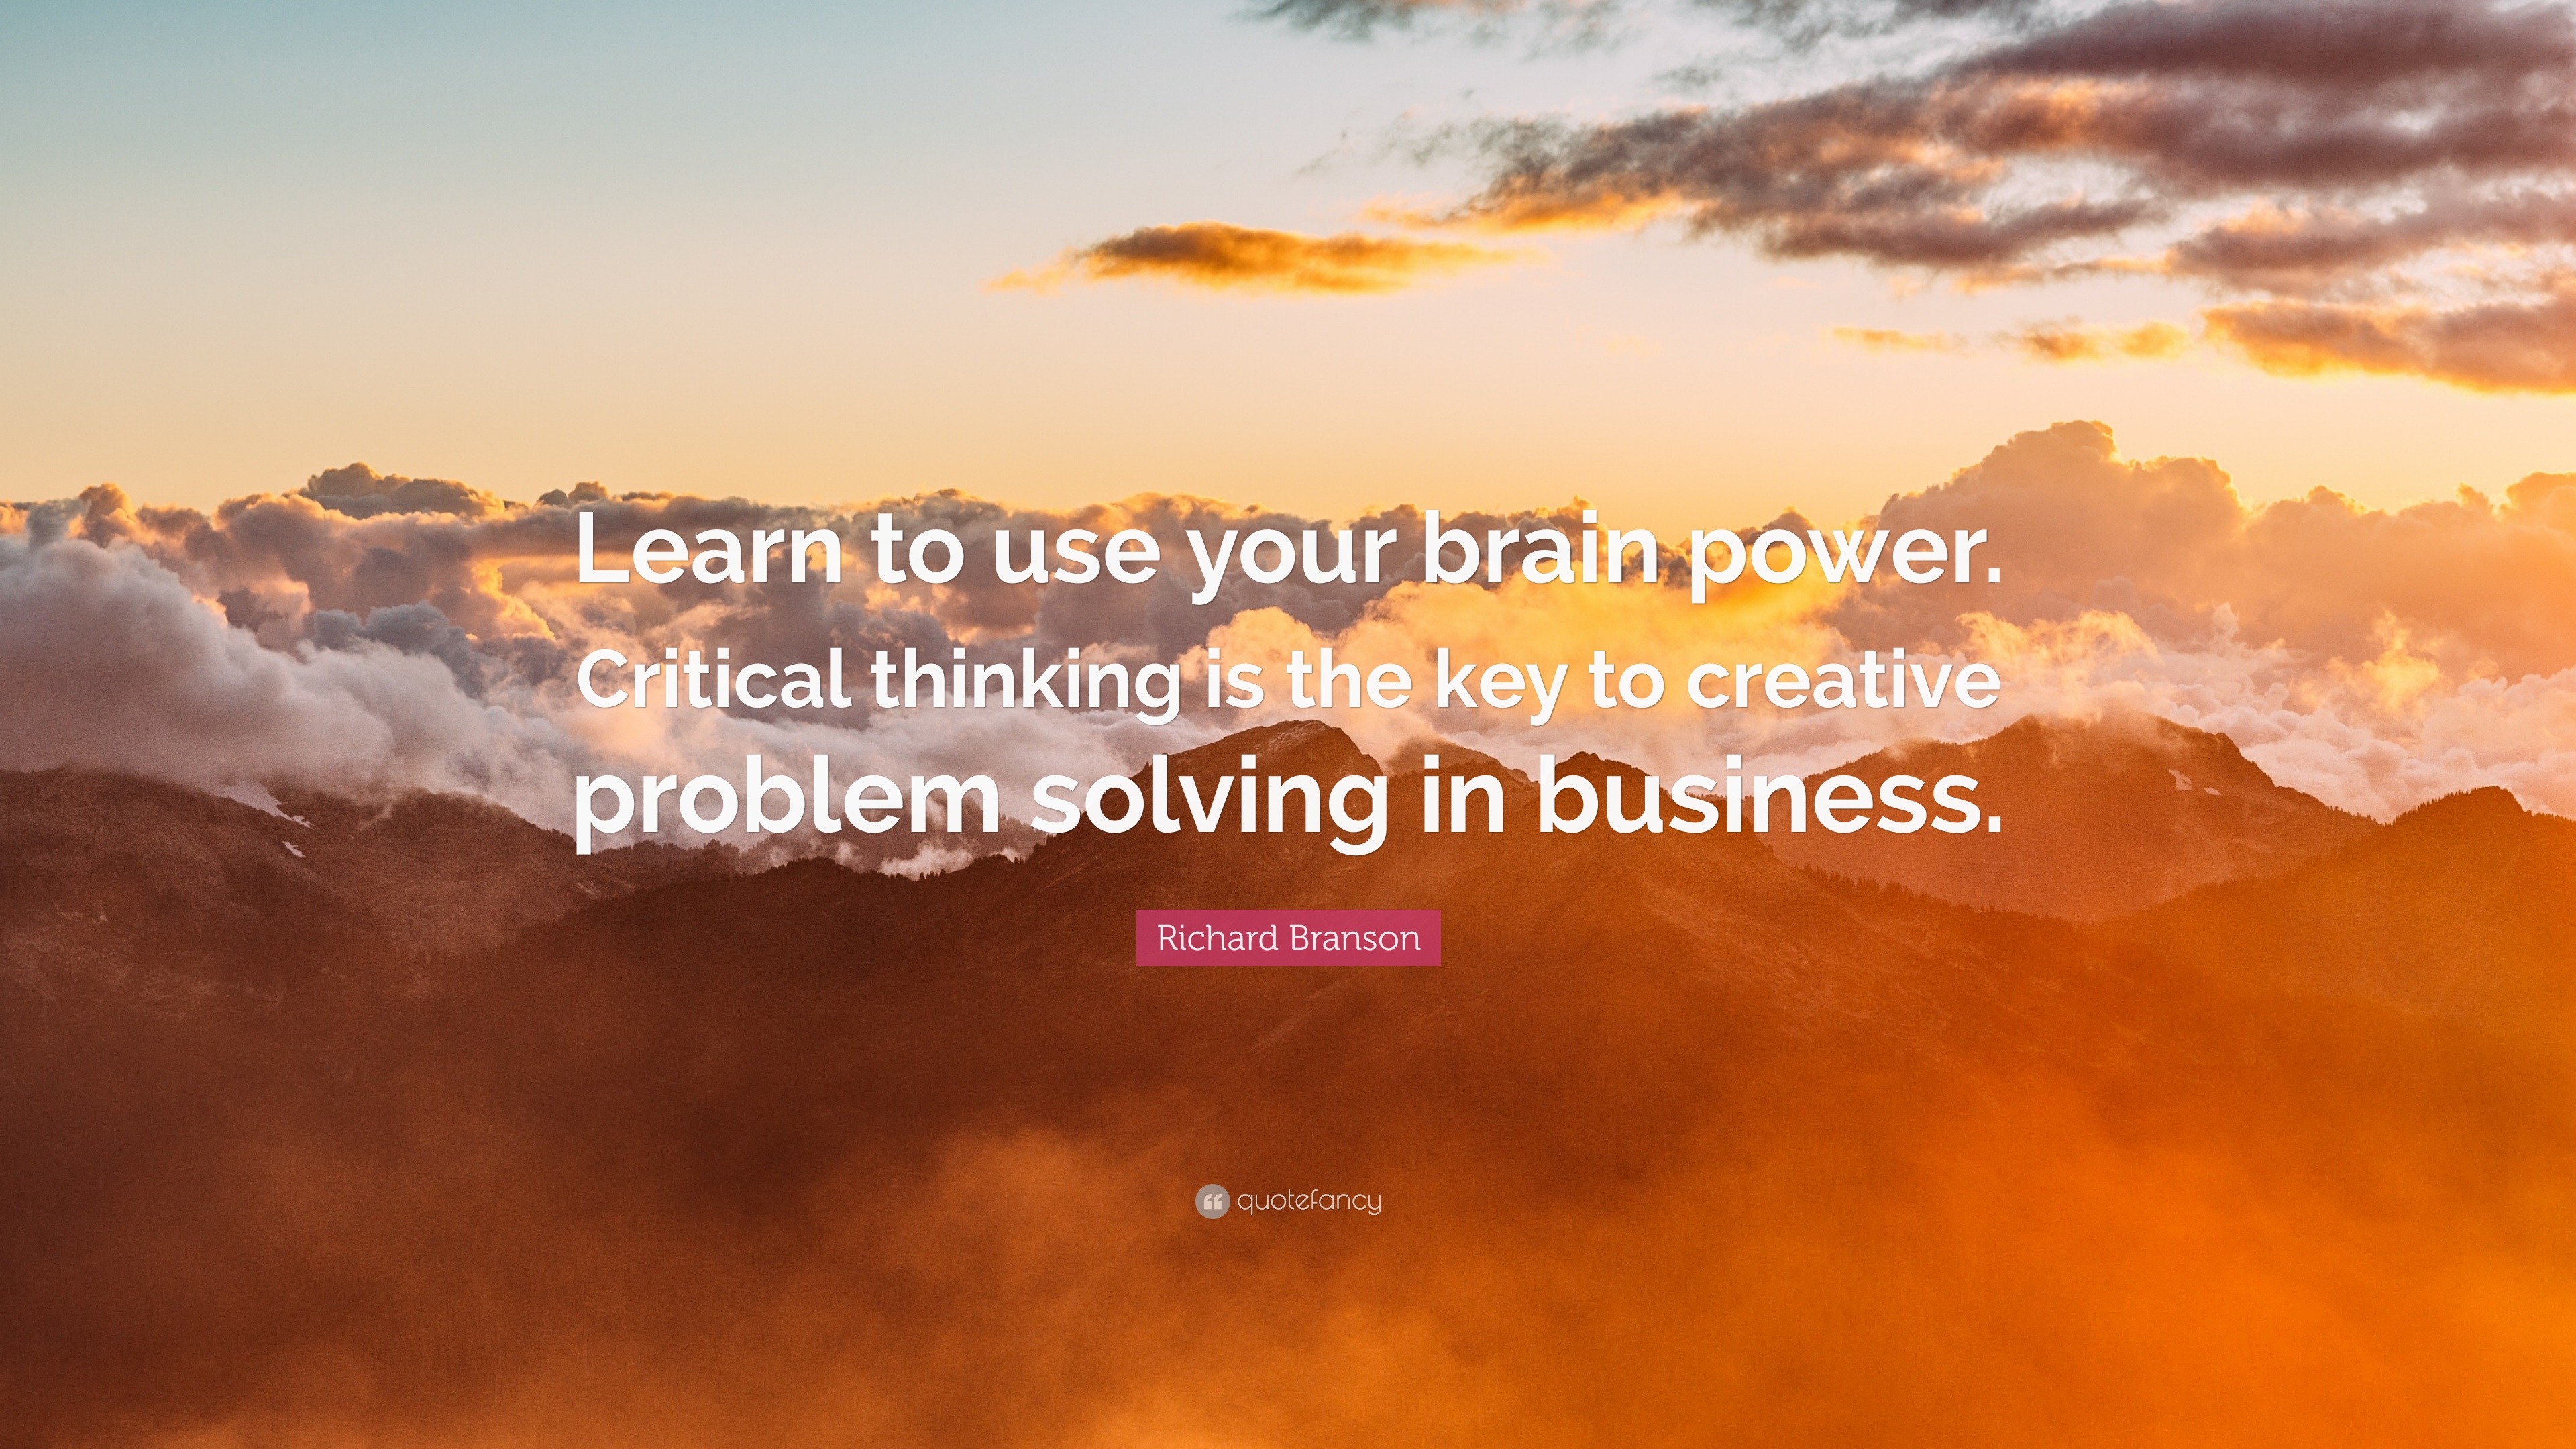 citation for power of critical thinking